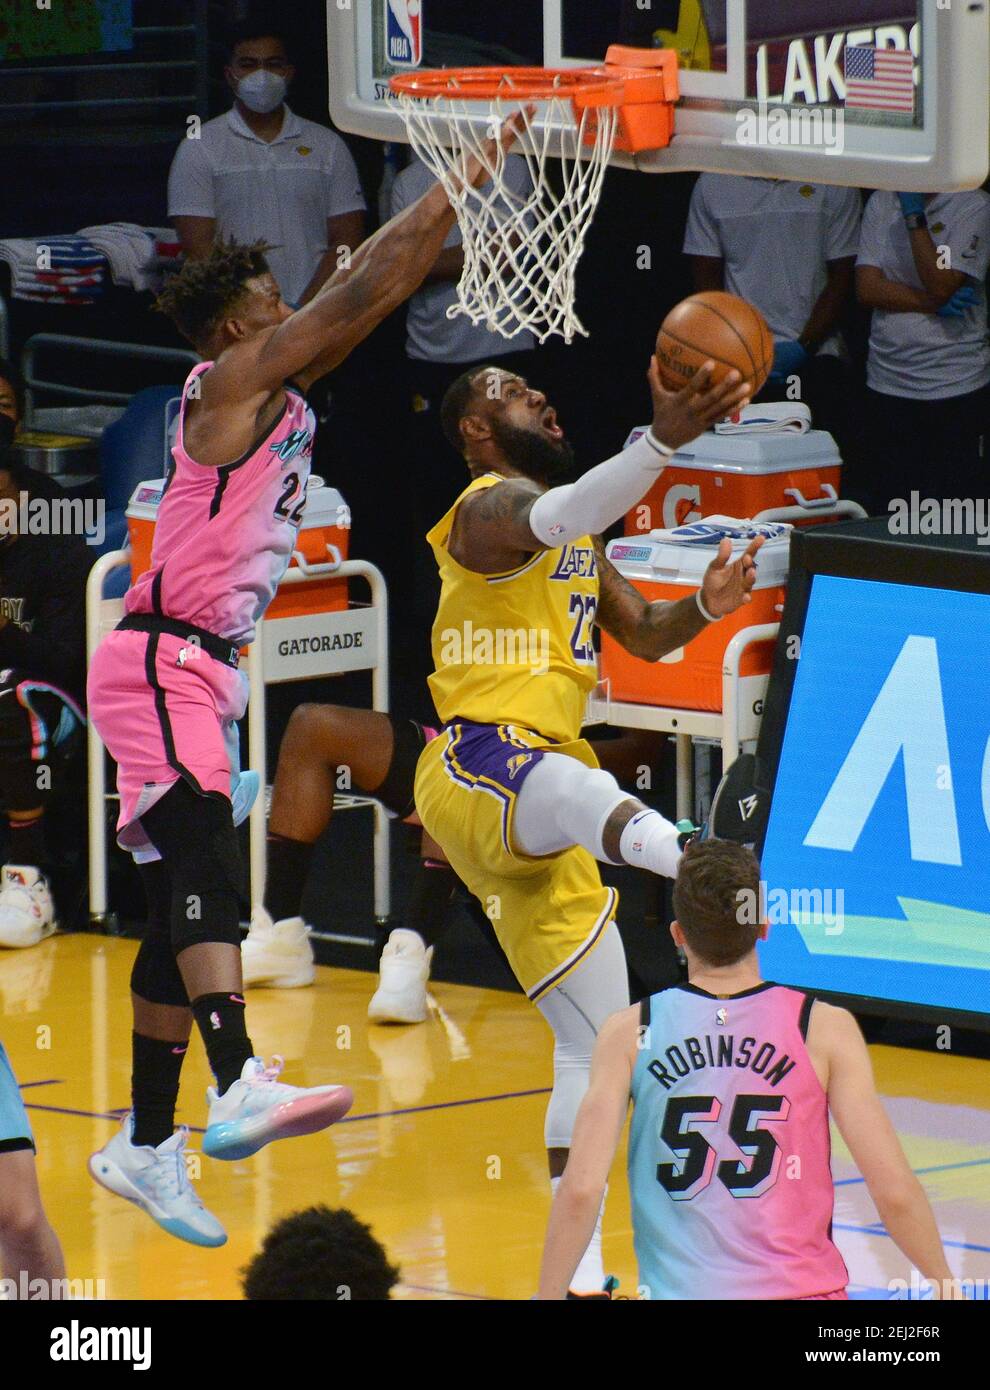 Los Angeles, United States. 20th Feb, 2021. Los Angeles Lakers' forward LeBron James scores on Miami Heat guard Jimmy Butler during the second half at Staples Center in Los Angeles on Saturday, February 20, 2021. The Heat defeated the Lakers 96-94. Photo by Jim Ruymen/UPI Credit: UPI/Alamy Live News Stock Photo